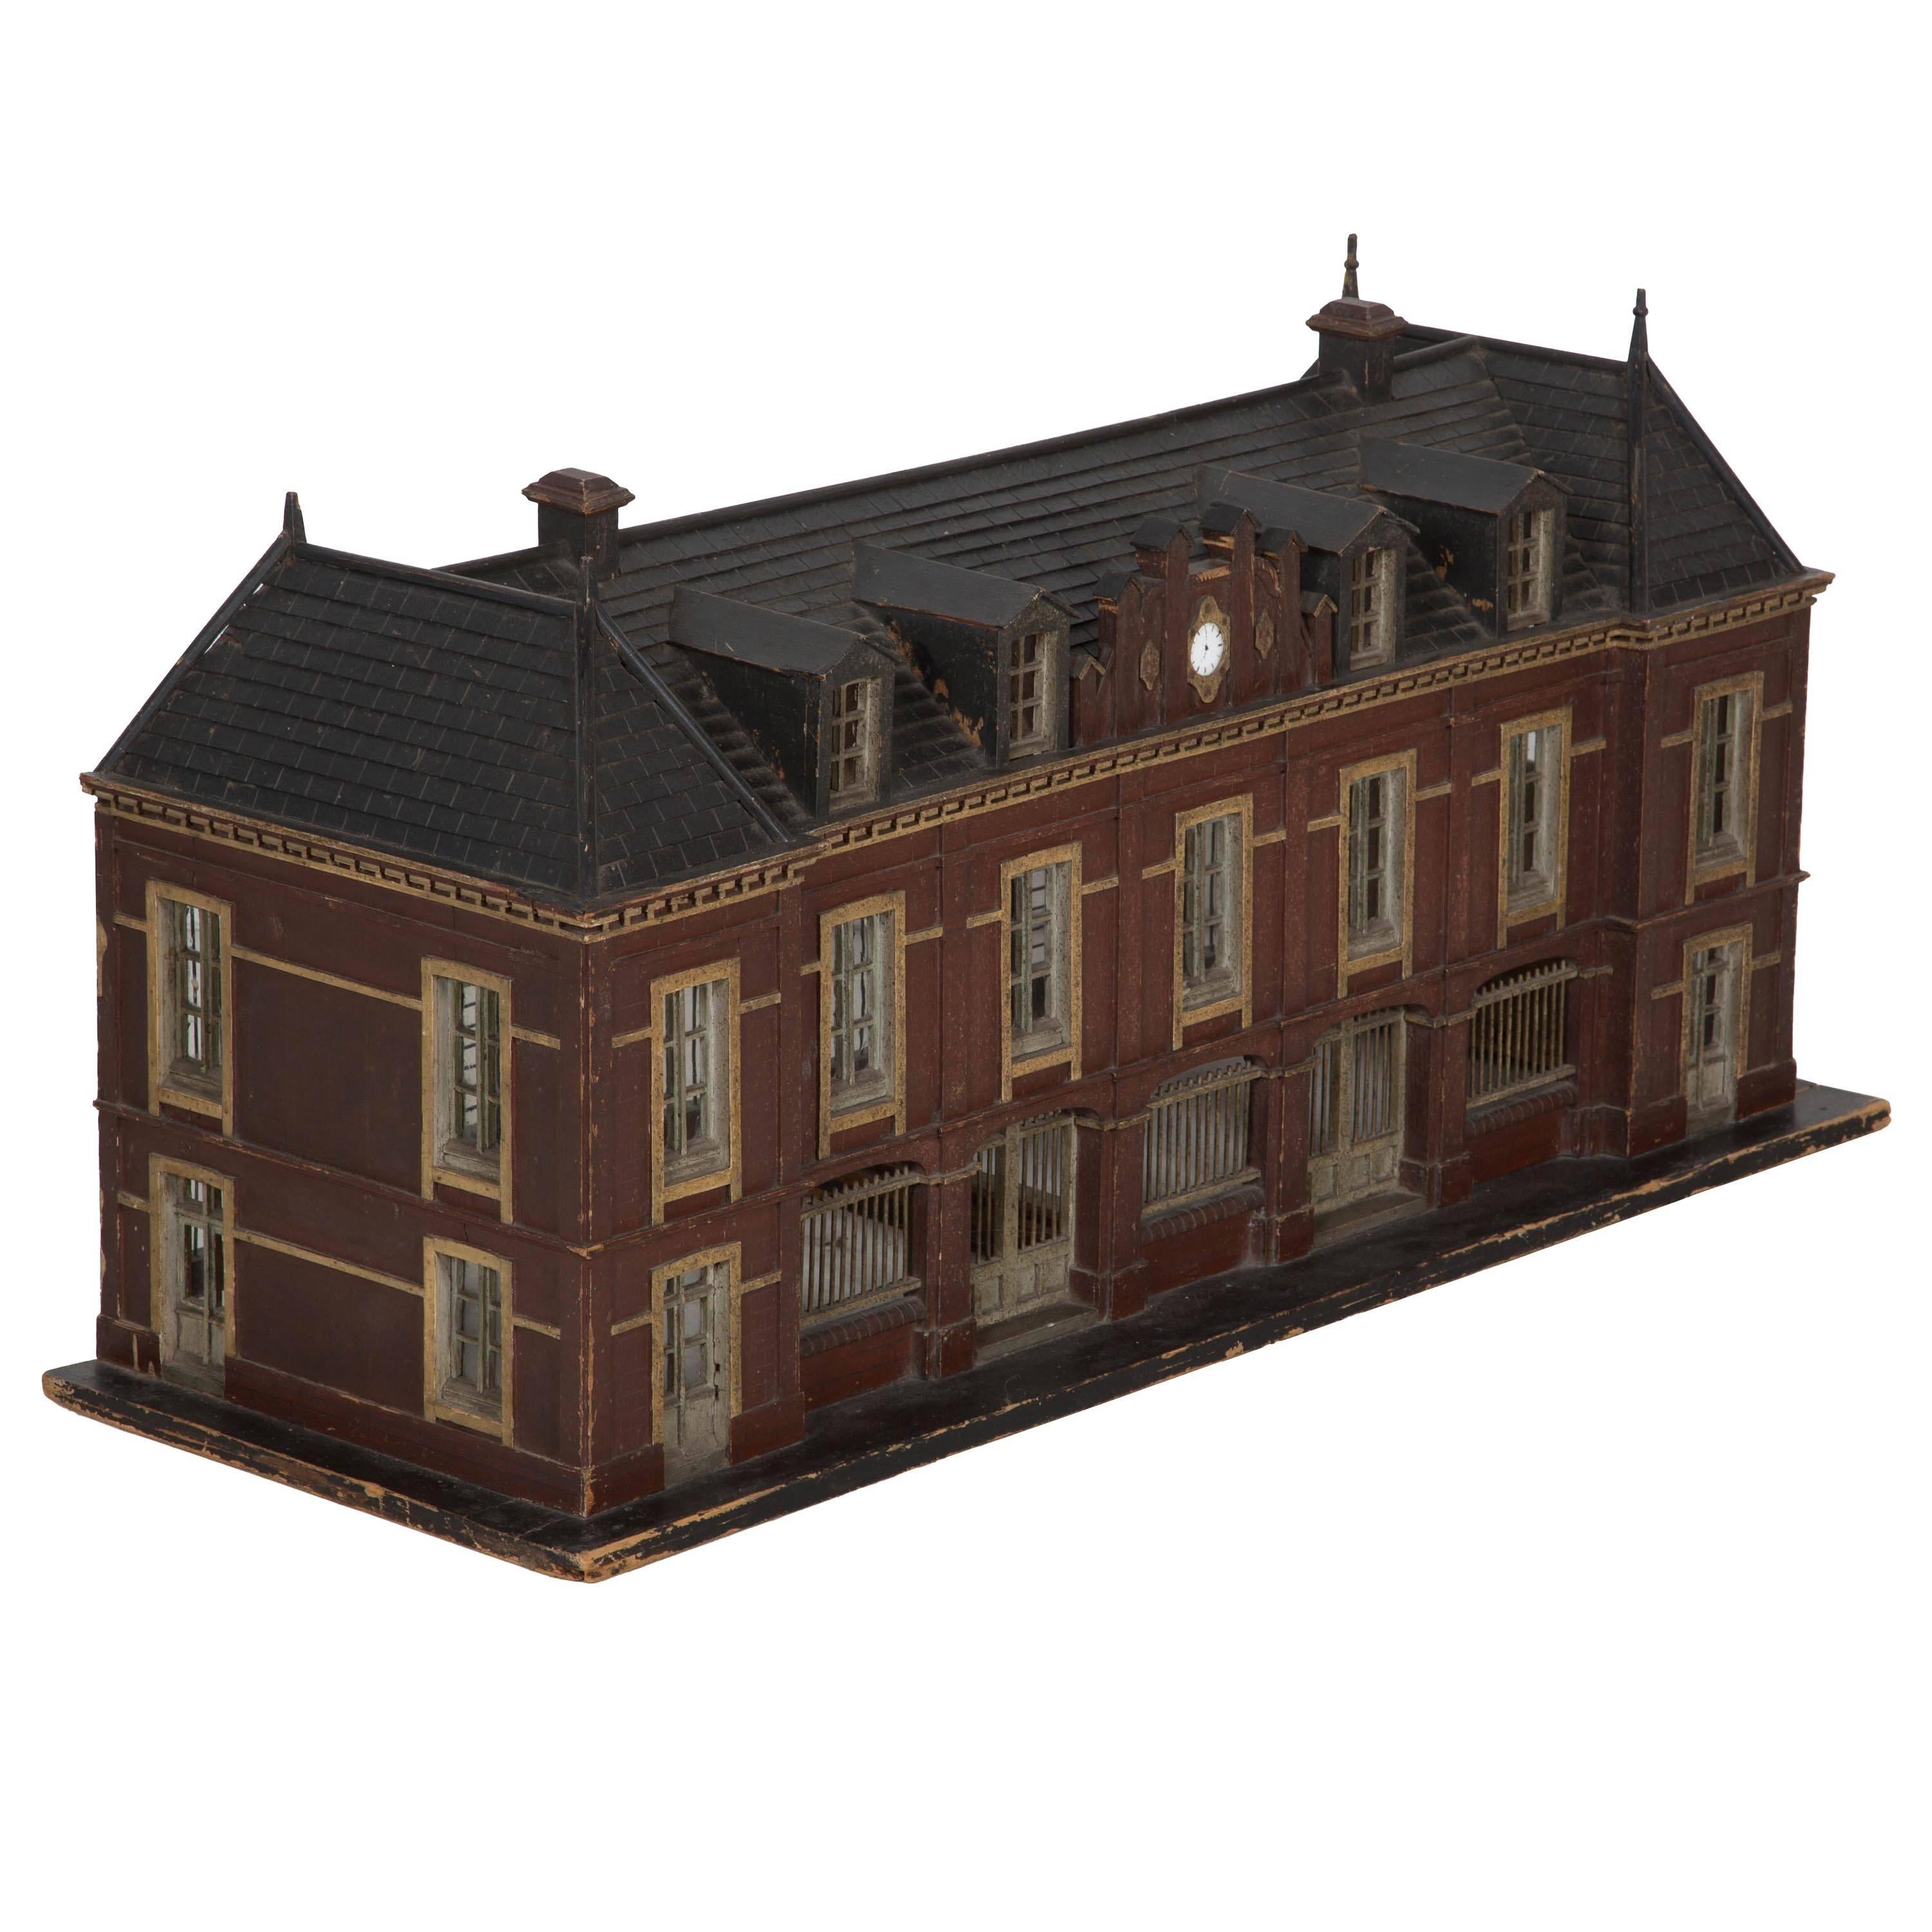 19th century Palladian style stabile-block modelled as small animal cage, in original condition.